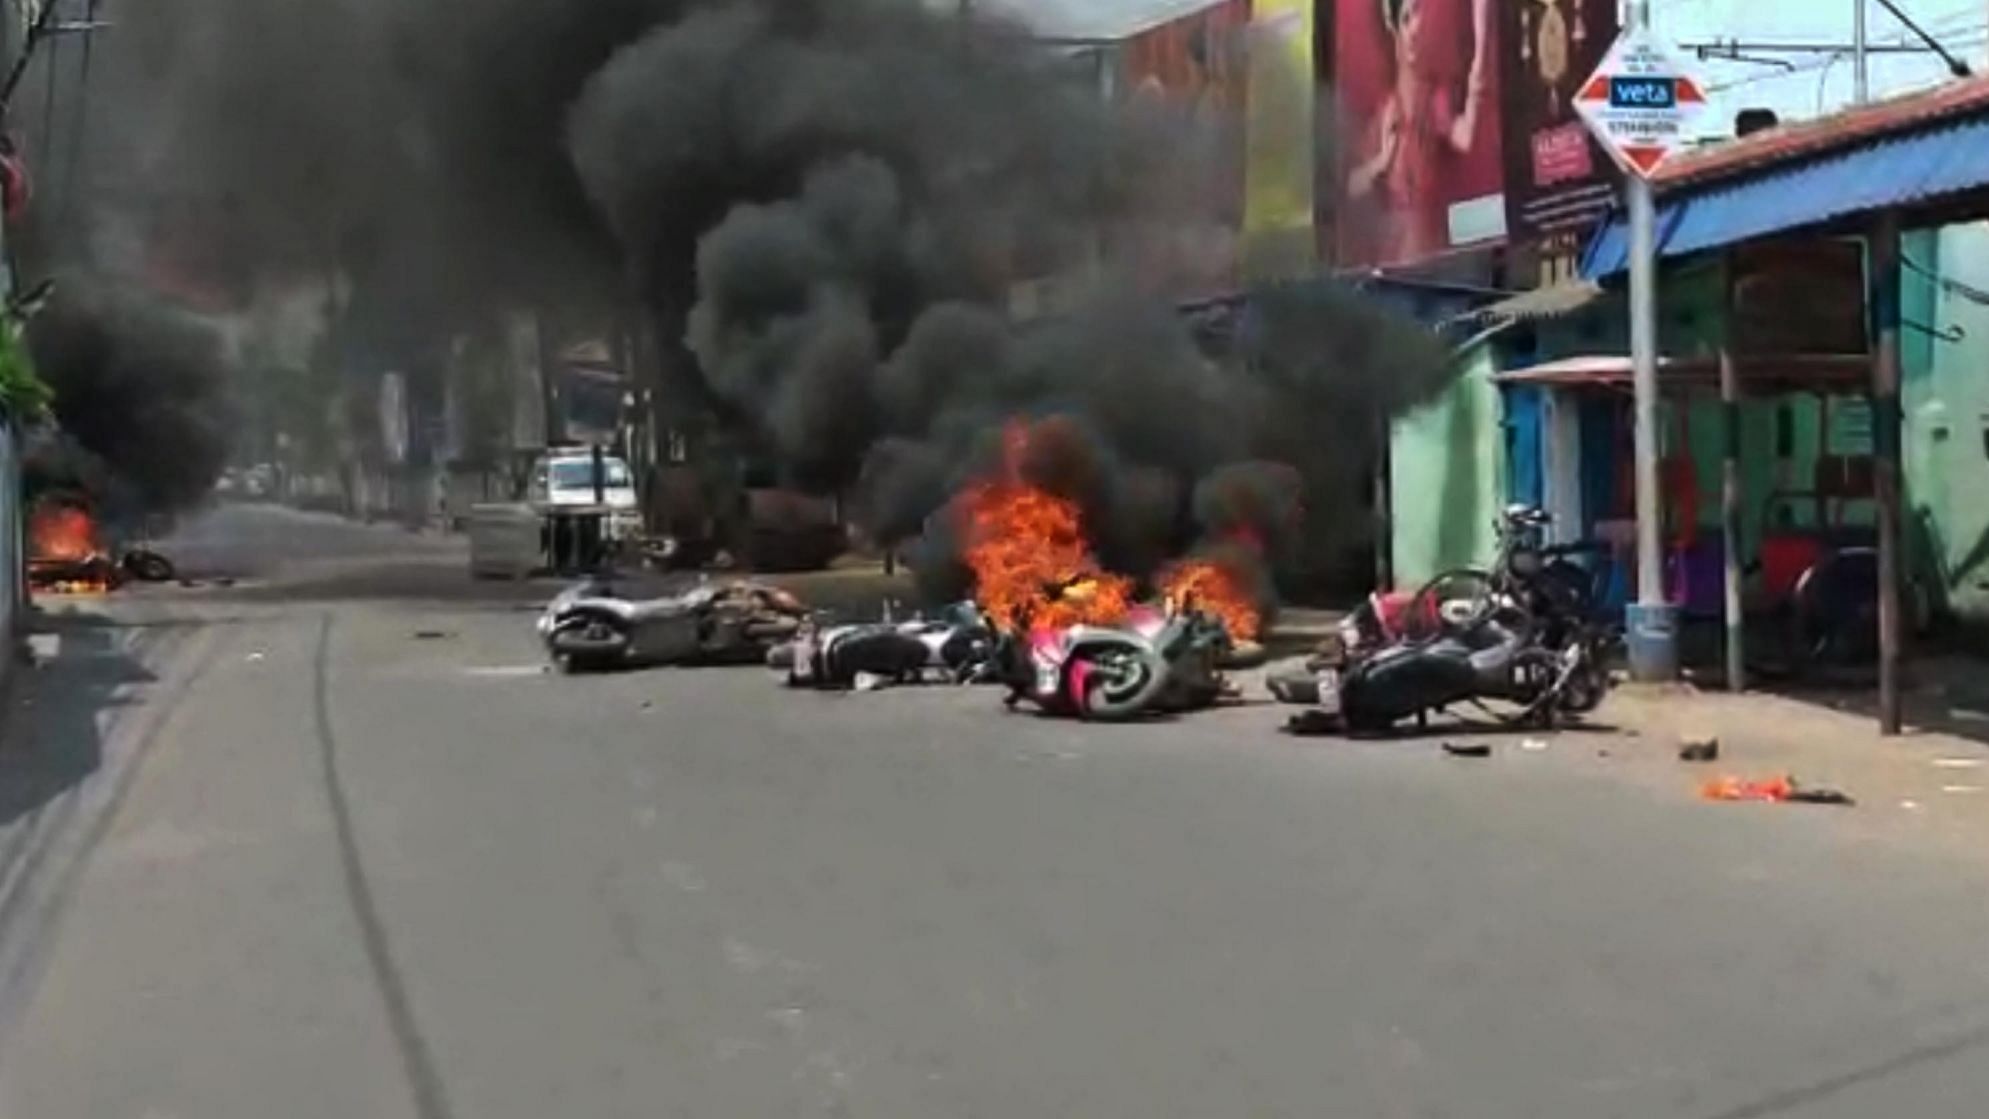 Caption: Barrackpore: A view of vehicles set on fire by an irate mob after violence broke out between TMC and BJP workers, after counting for the votes cast in the 2019 Lok Sabha polls concluded, in West Bengal’s Barrackpore, on 24 May  2019.&nbsp;